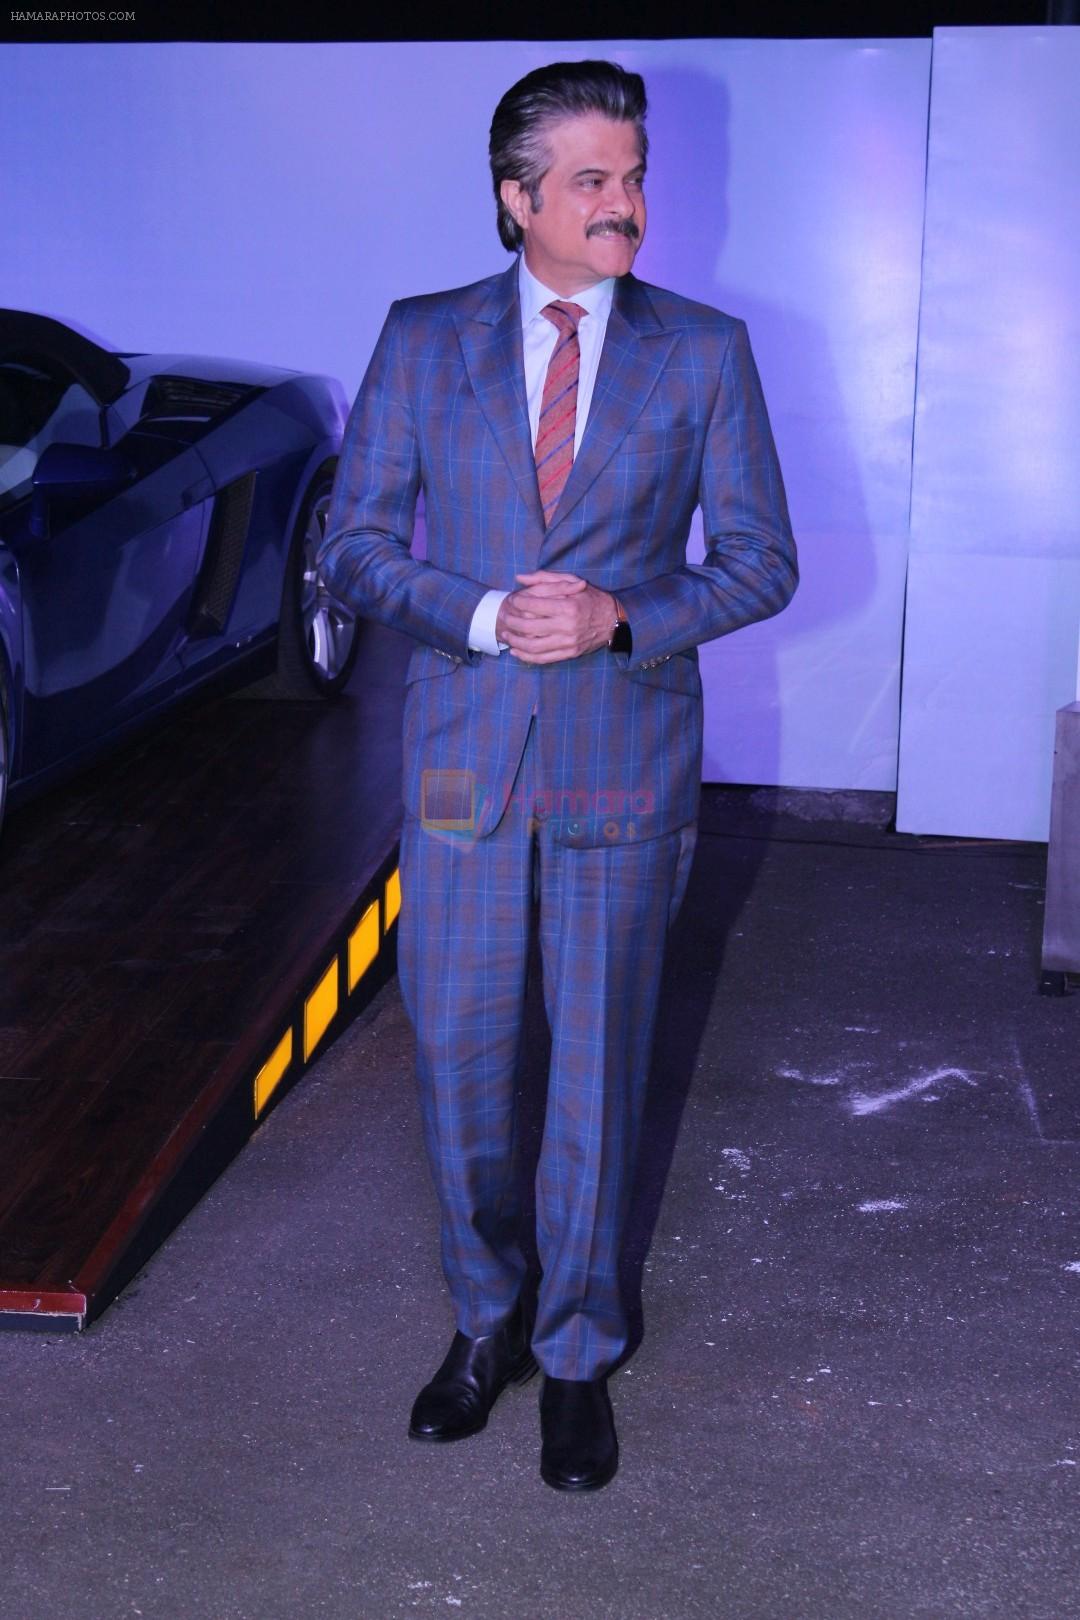 Anil Kapoor at the Red Carpet Of The Screening Of Amazon Original The Grand Tour Hosted By Anil Kapoor on 10th Dec 2017